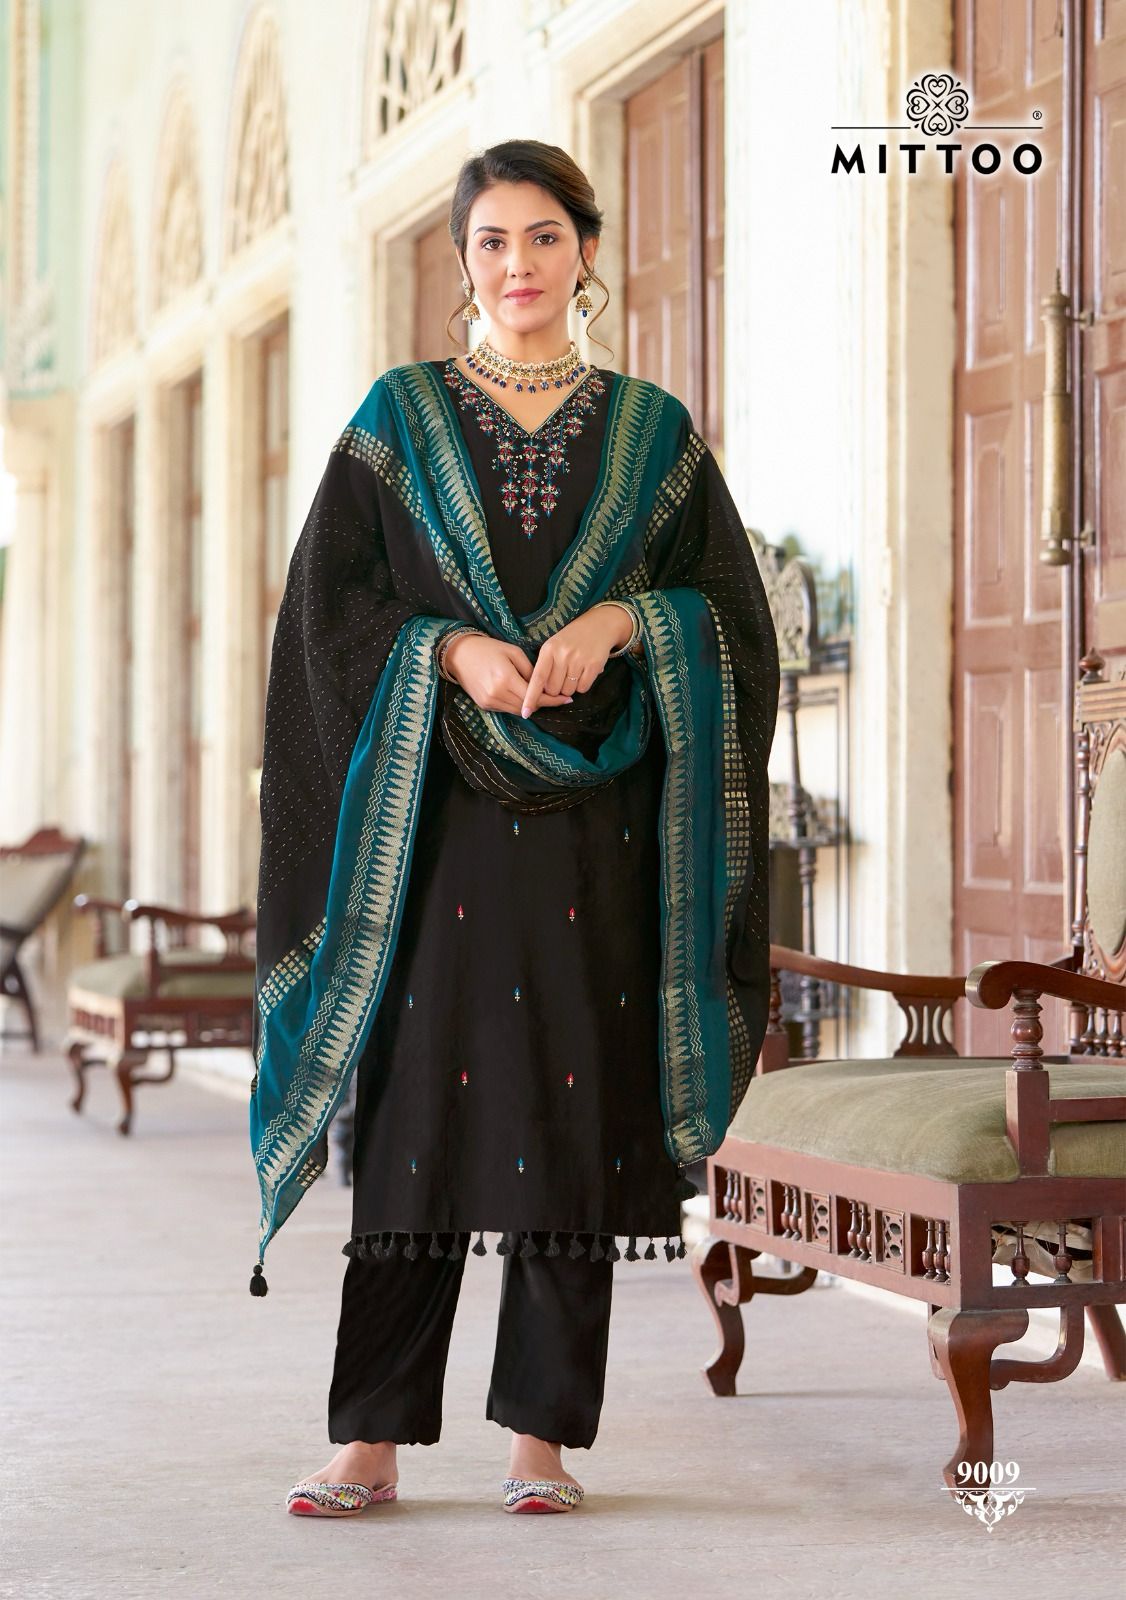 Mosam Vol 2 Mittoo Viscose Weaving Readymade Pant Style Suits